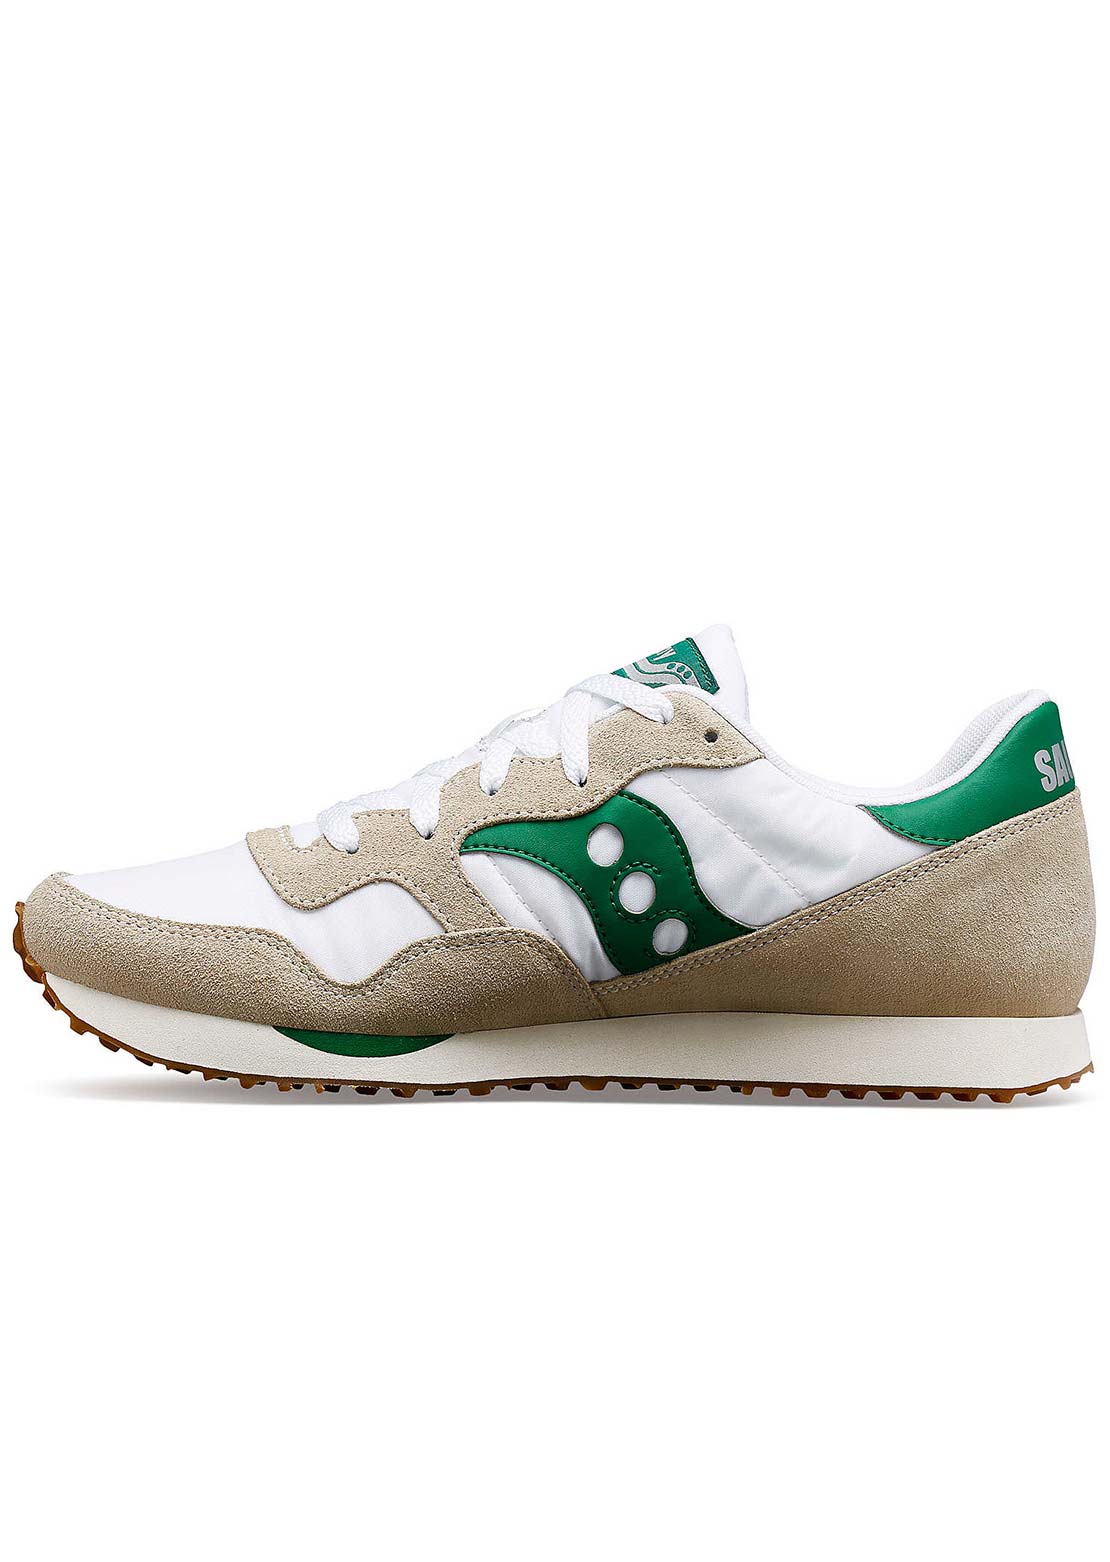 Saucony Unisex DXN Trainer Shoes White/Green